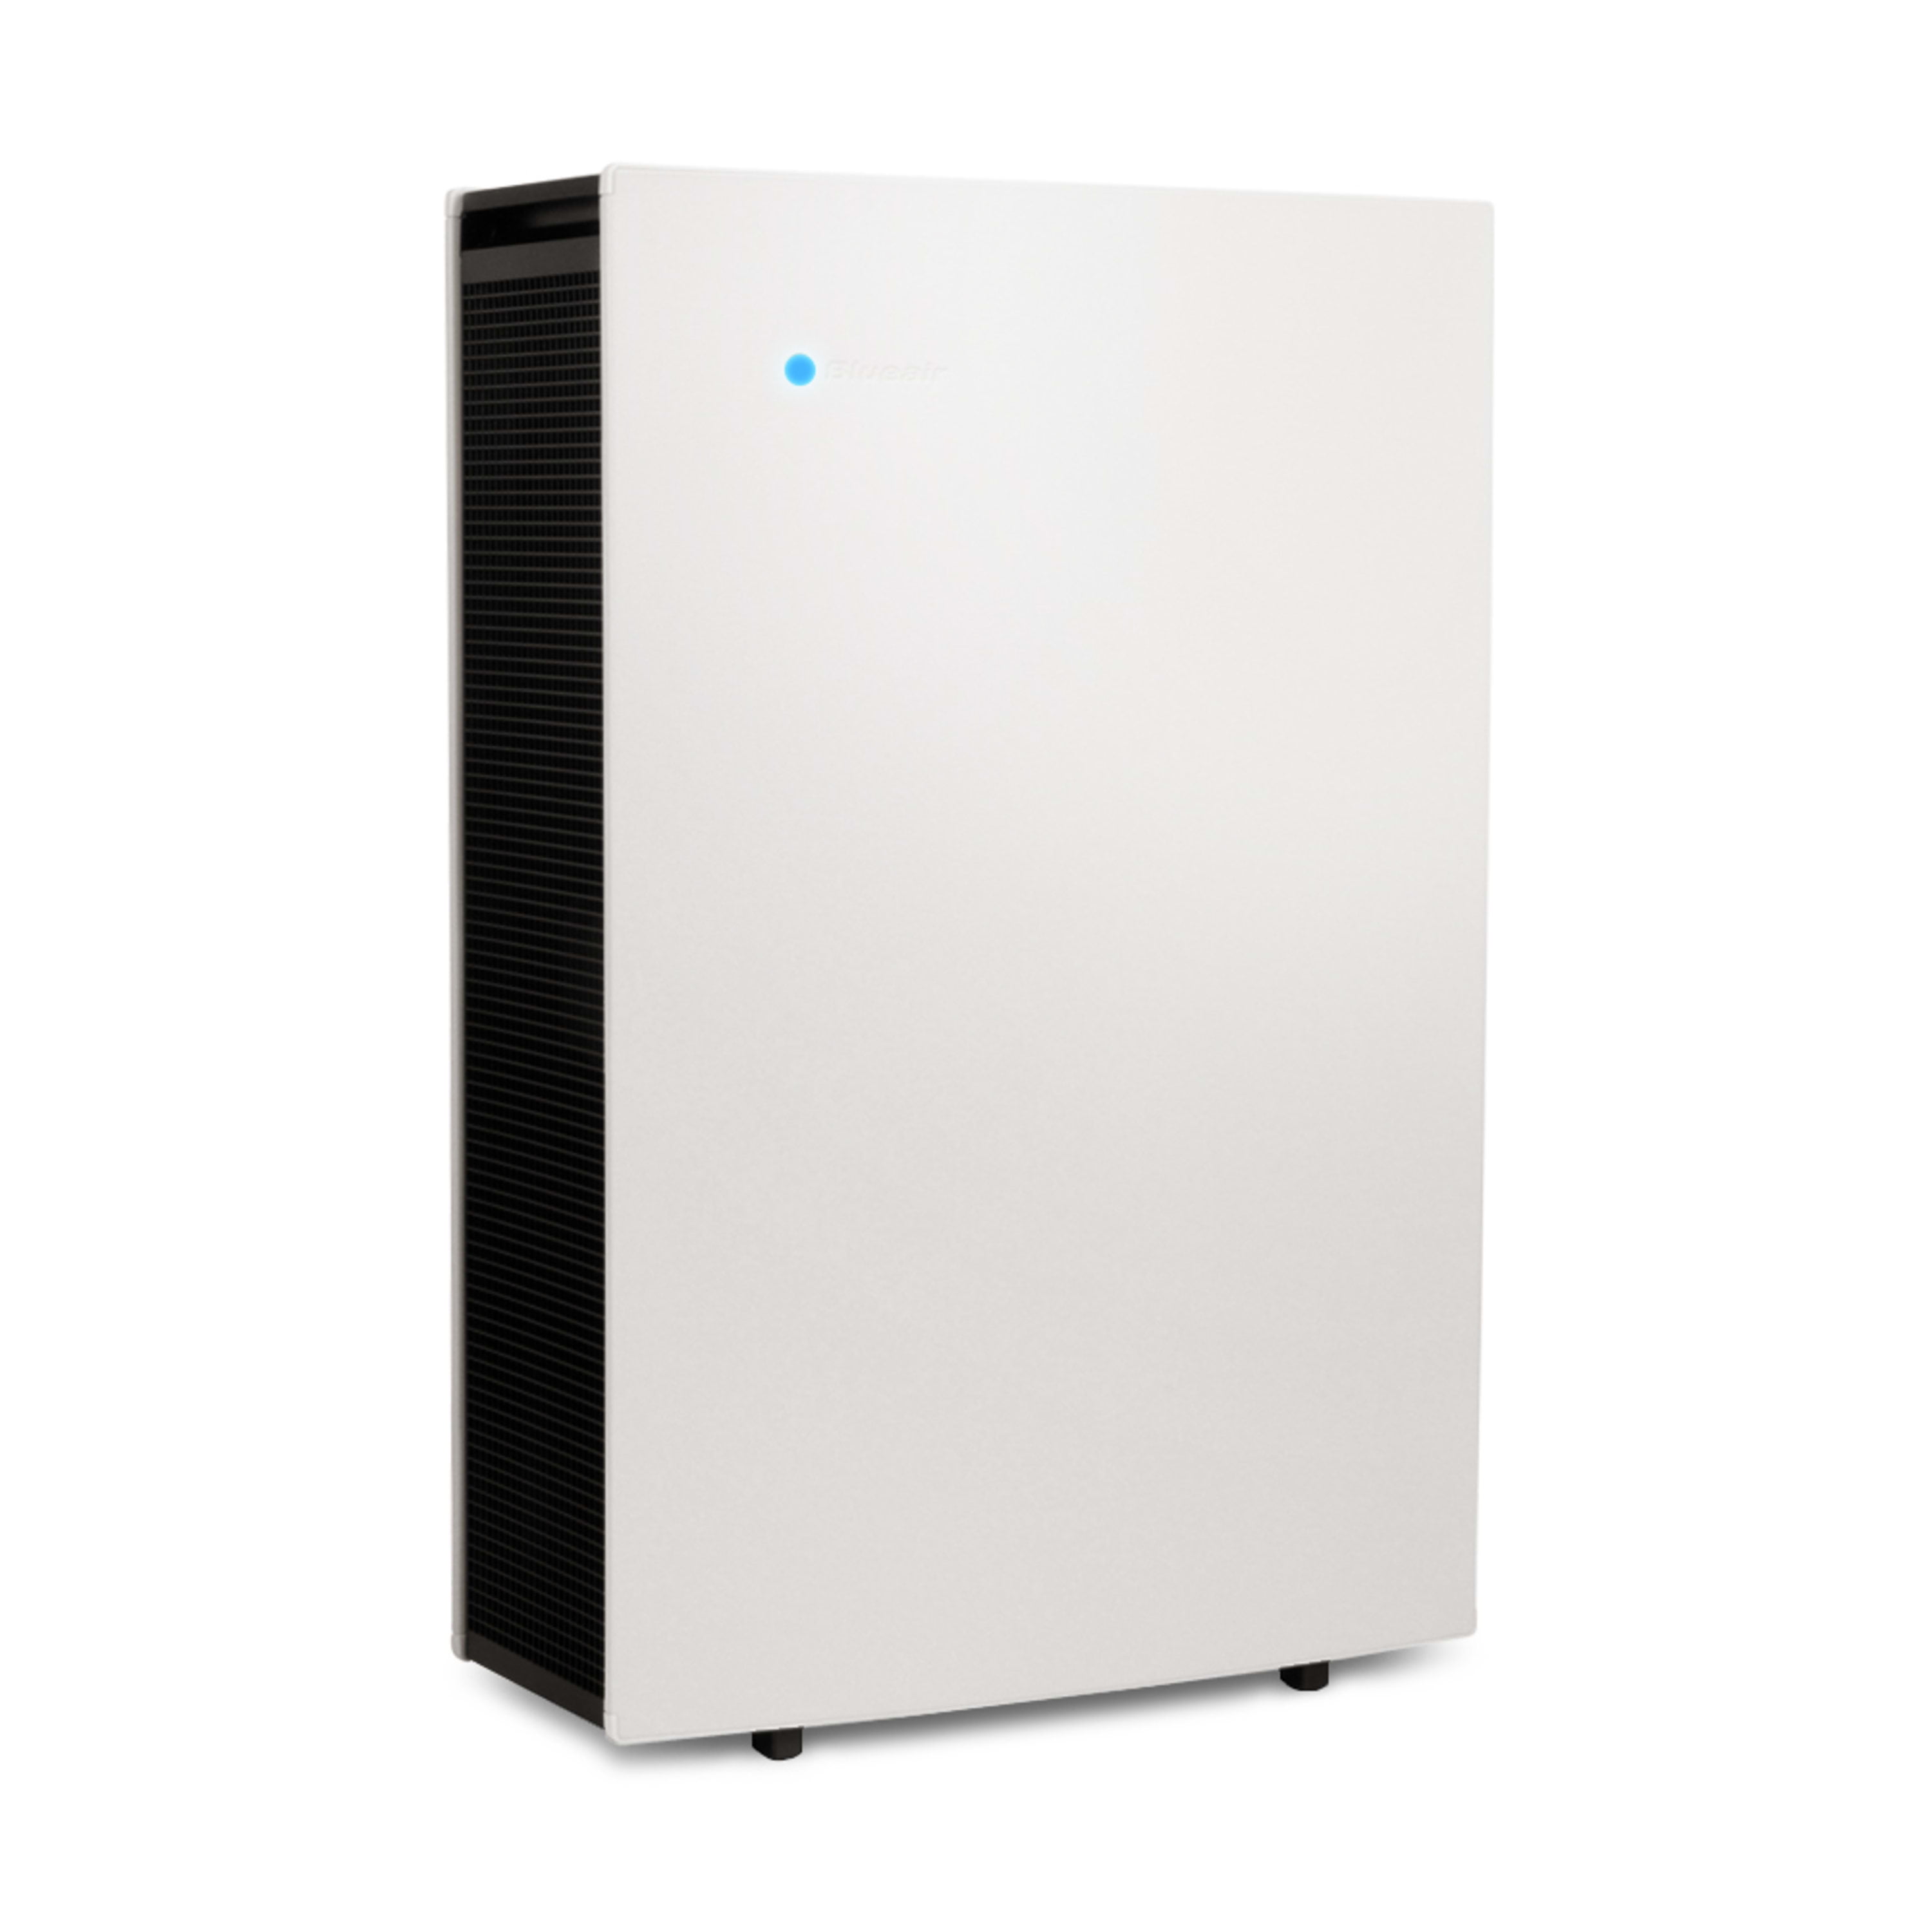 Blueair Pro L Air Purifier, Mold, Smoke and Dust Remover, High Performance  for Office, Workspace, Homes, White